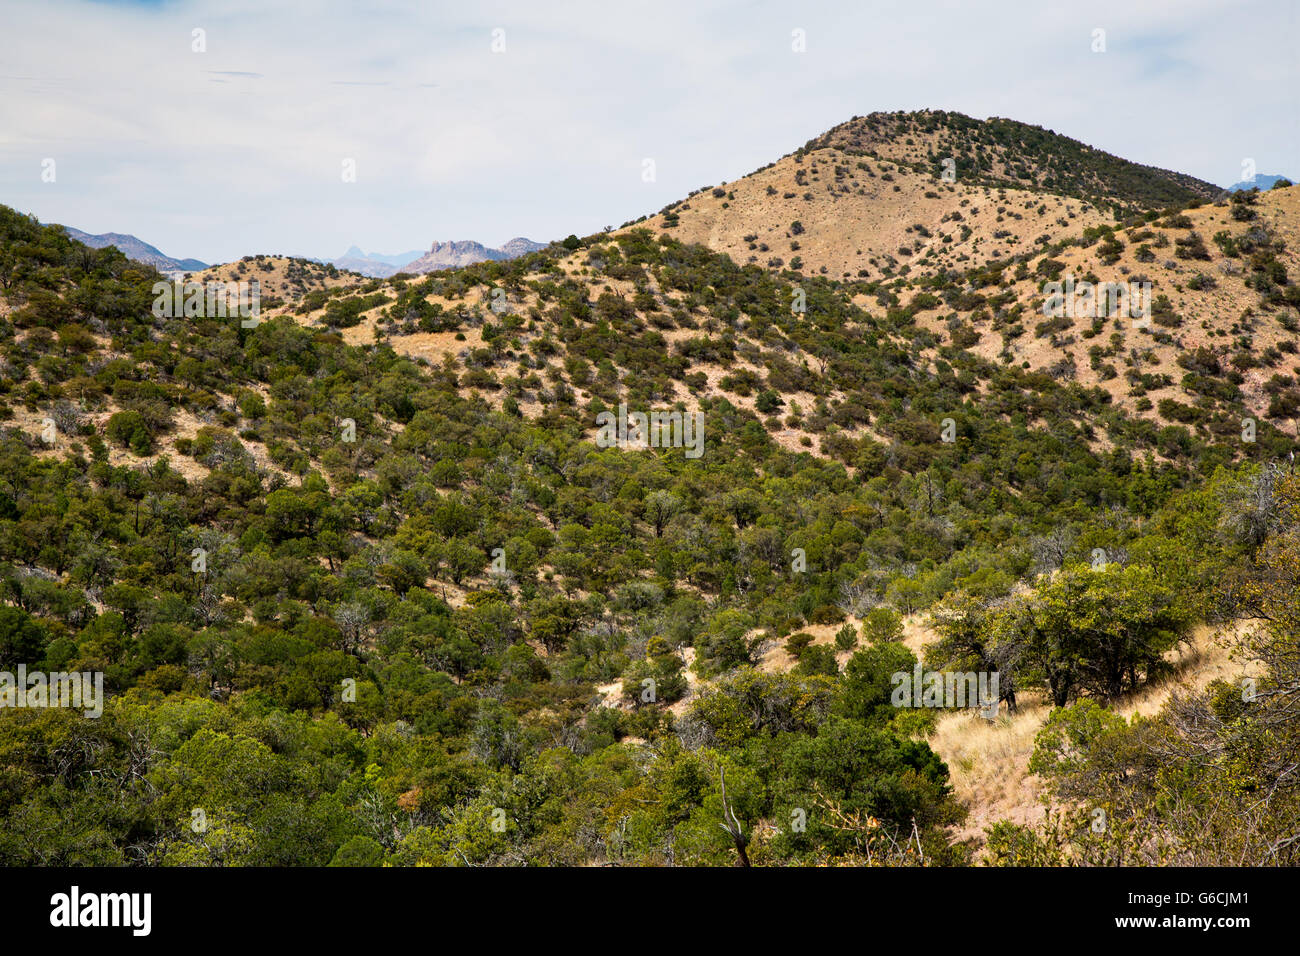 The Canelo Hills in southern Arizona with a forest of juniper, oak, and pinyon pine trees. Coronado National Forest, Arizona Stock Photo